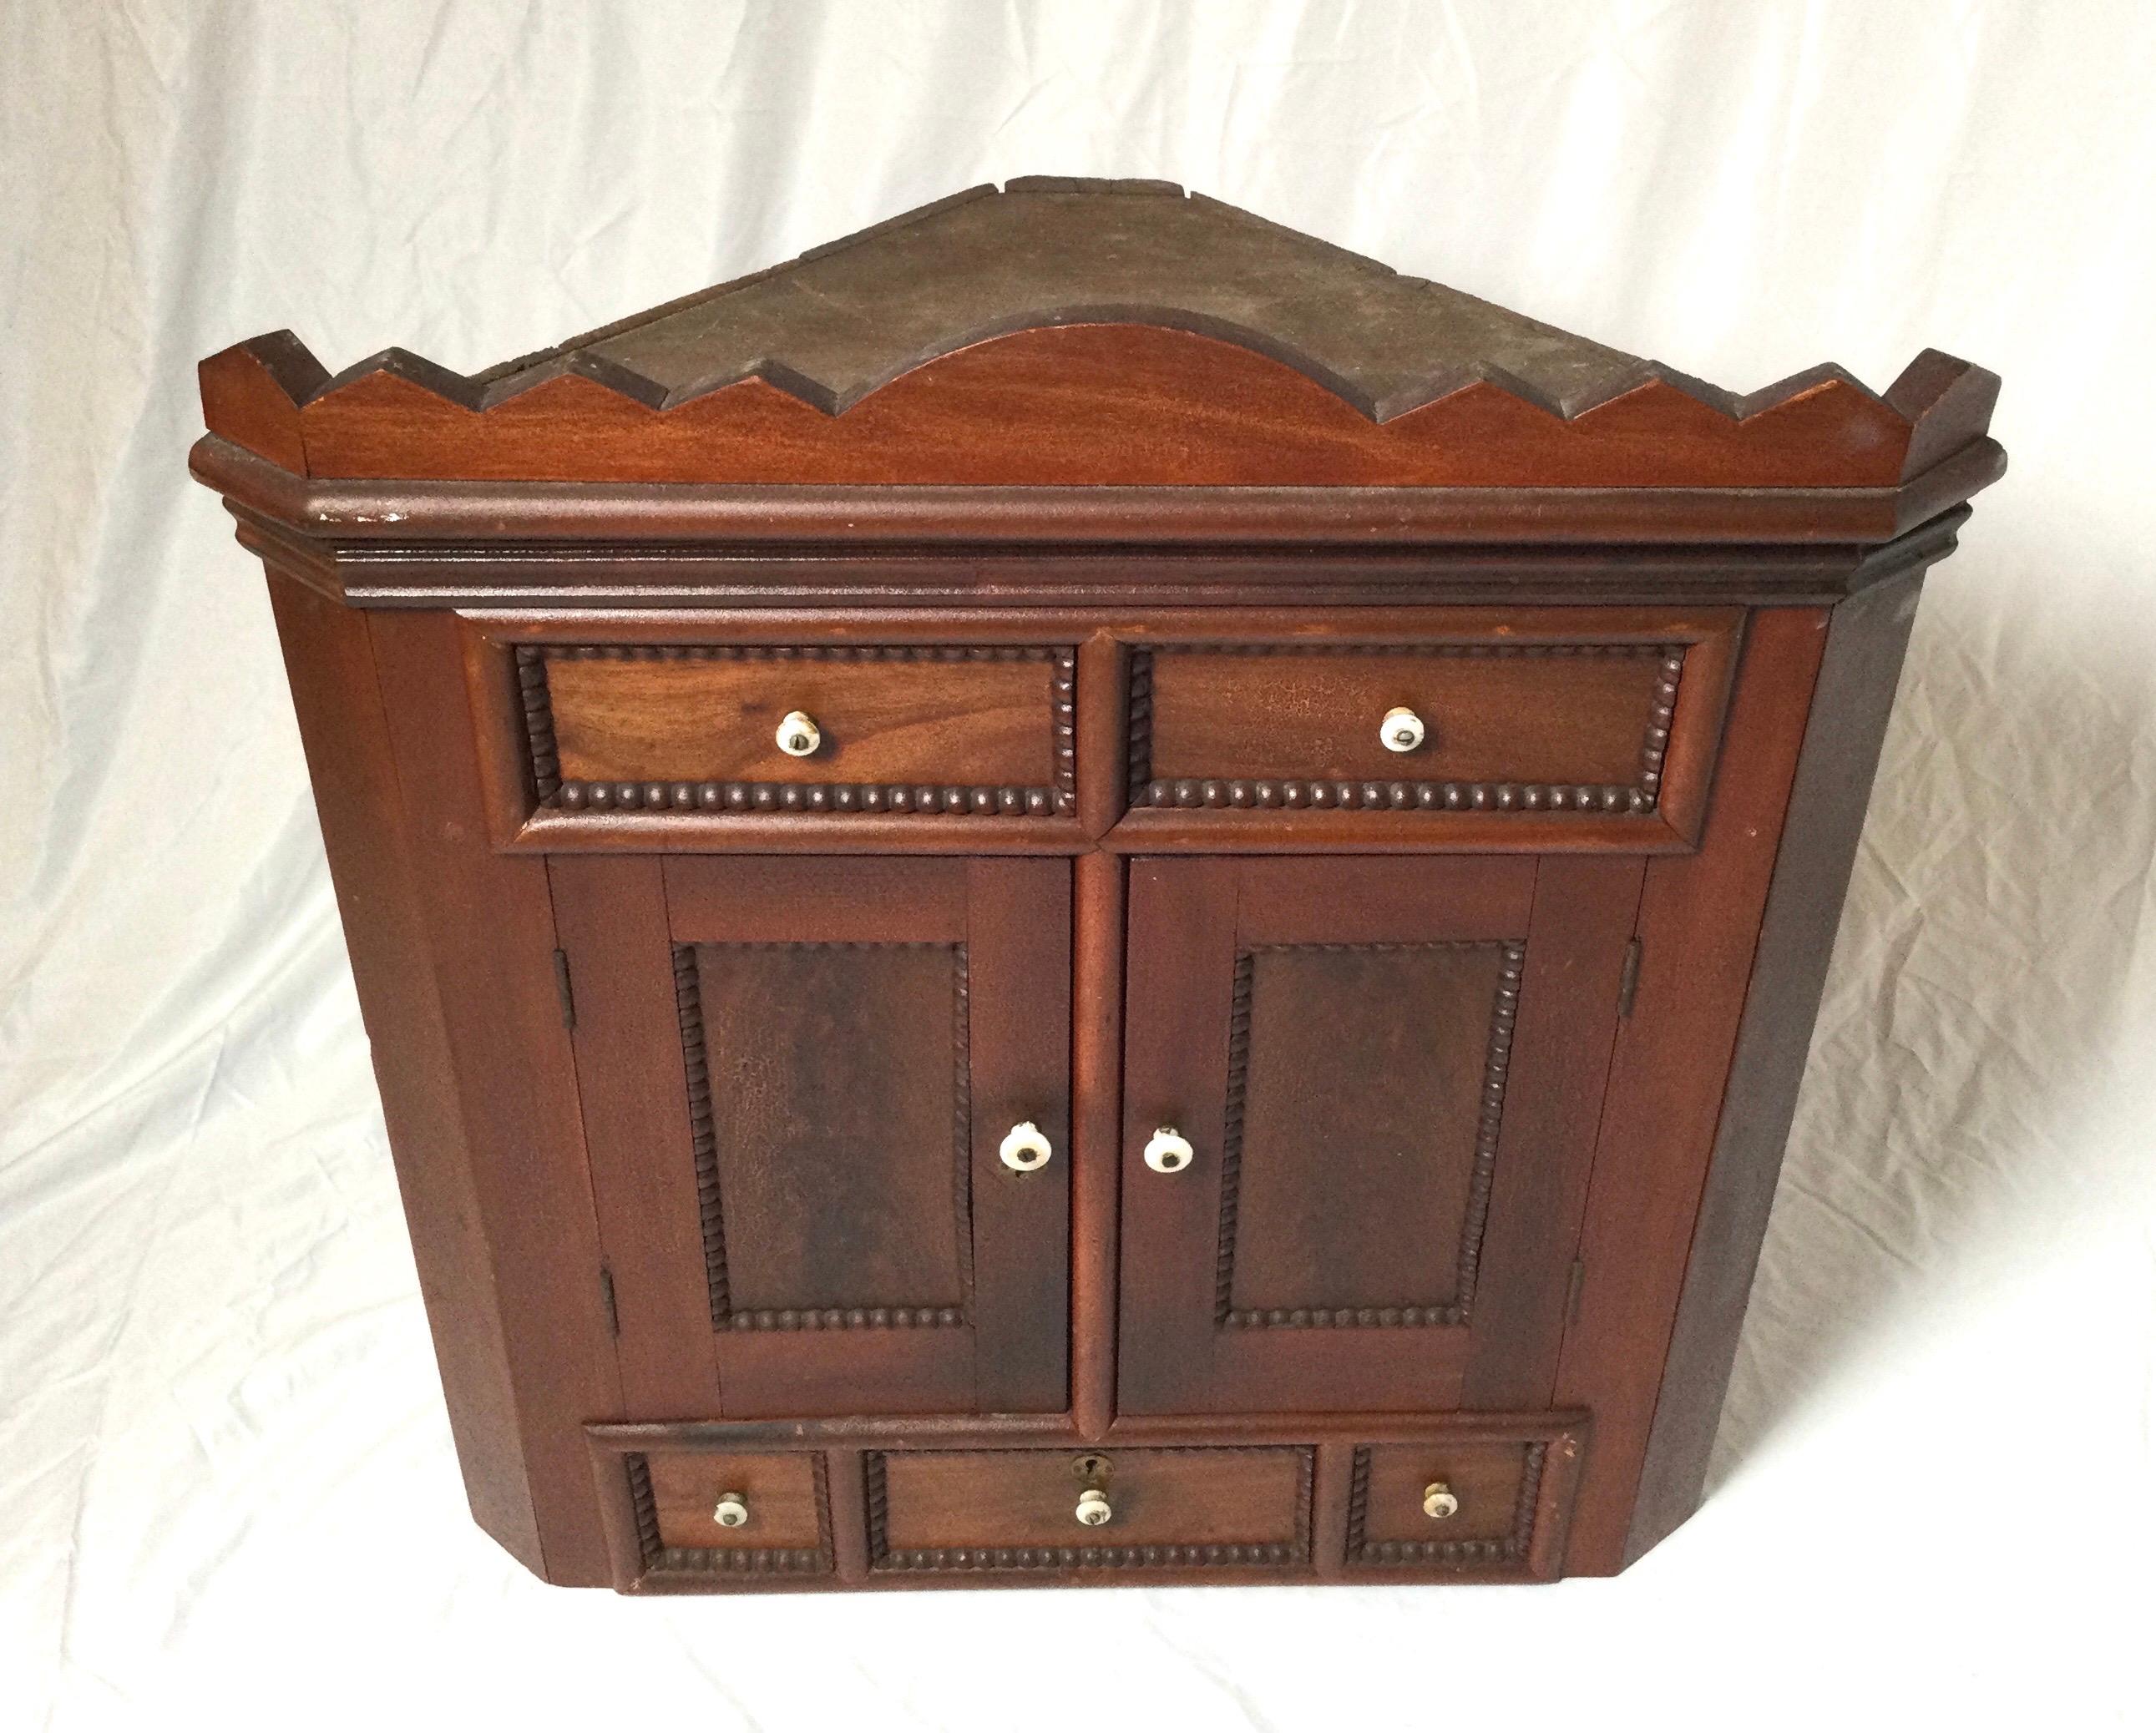 Charming medium color poplar wood cabinet with two doors with concealed compartments with drawers. Signed D.B. Branch 1915.
The cabinet with nice original finish with a natural warm patination.